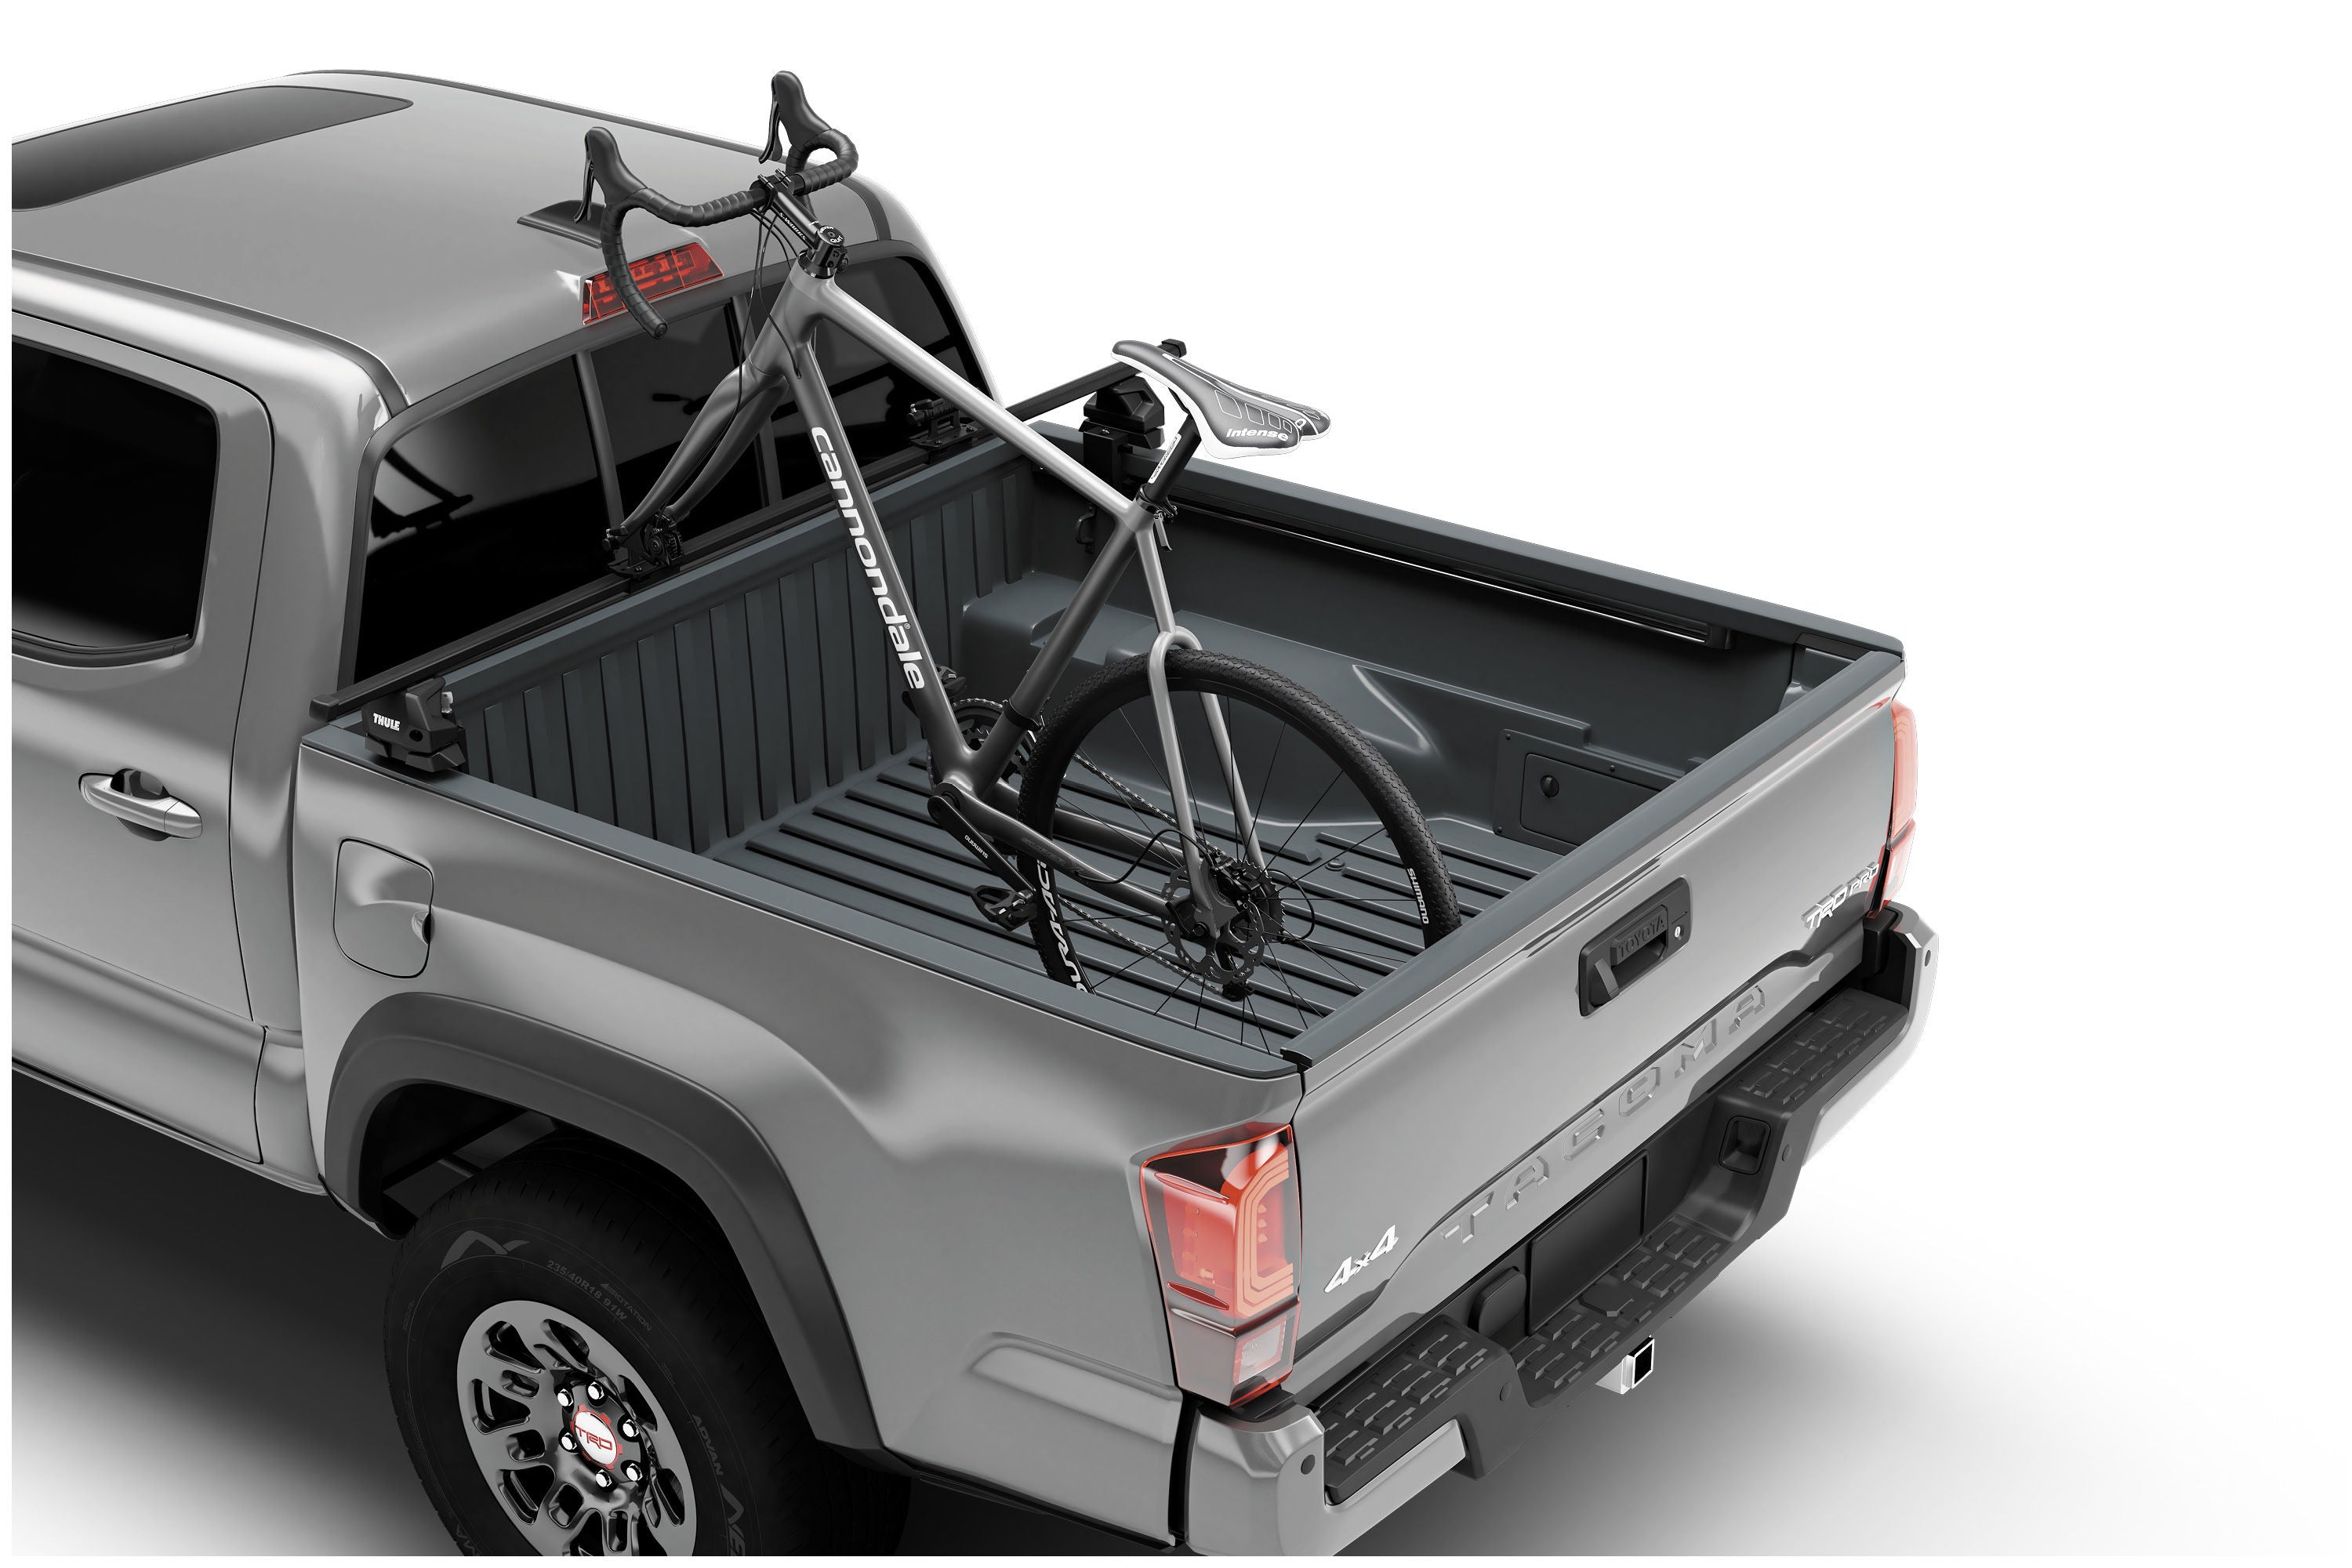 Thule 822101 - Bed Rider Pro Compact Bike Rack